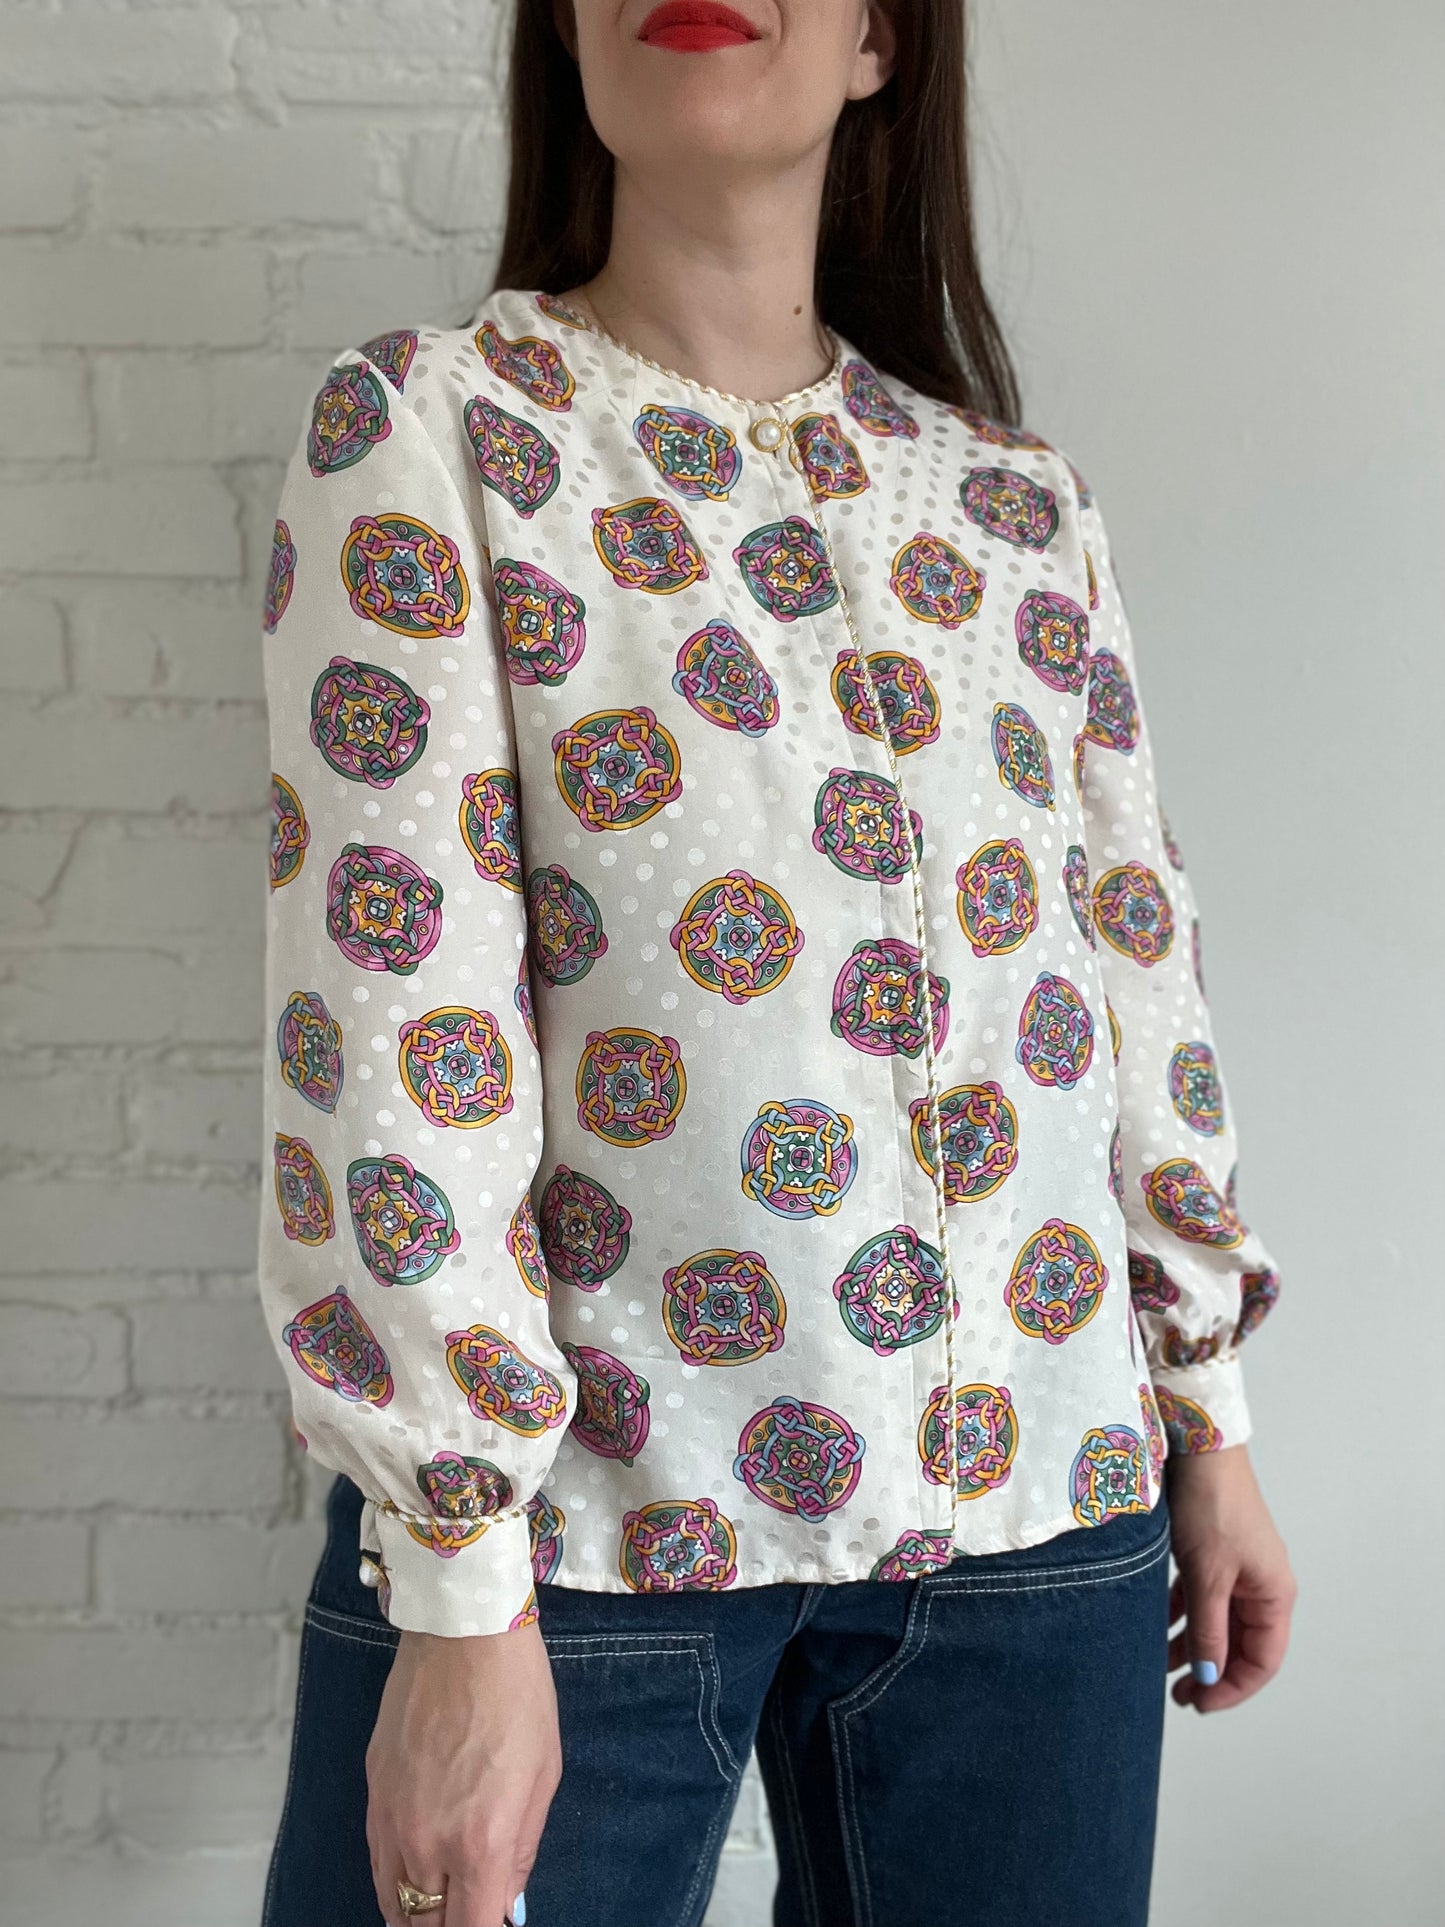 Ruth's Colourful Luxury Blouse - M/L